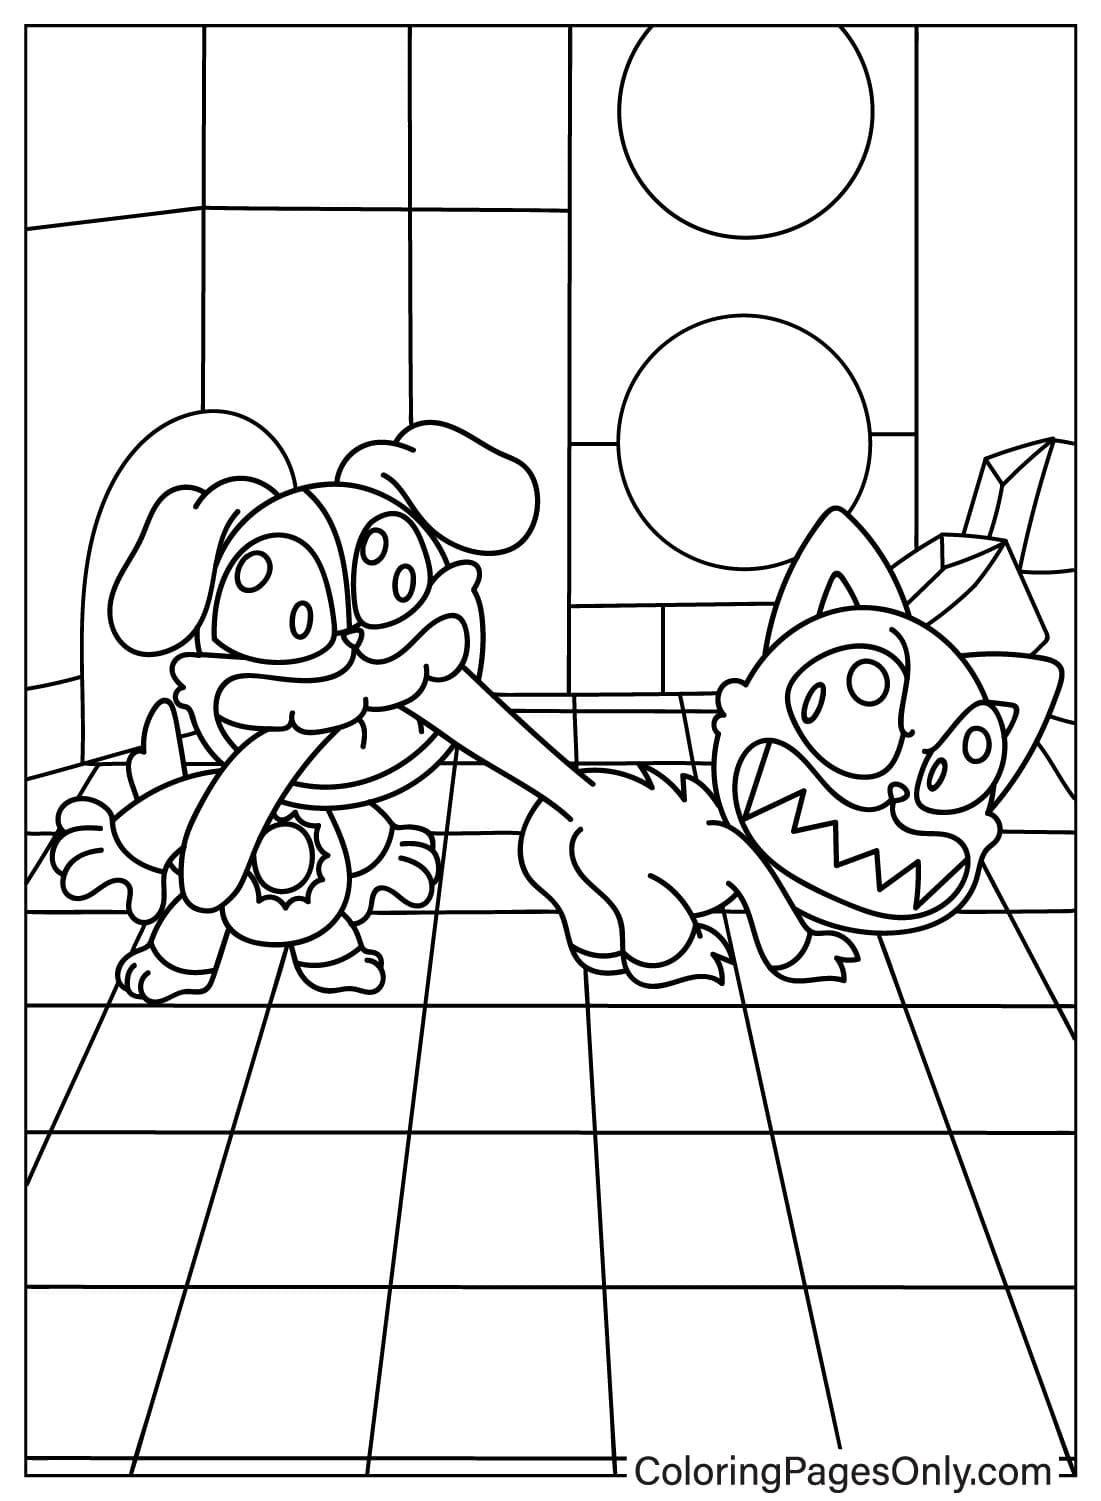 Images DogDay and CatNap Coloring Page from DogDay